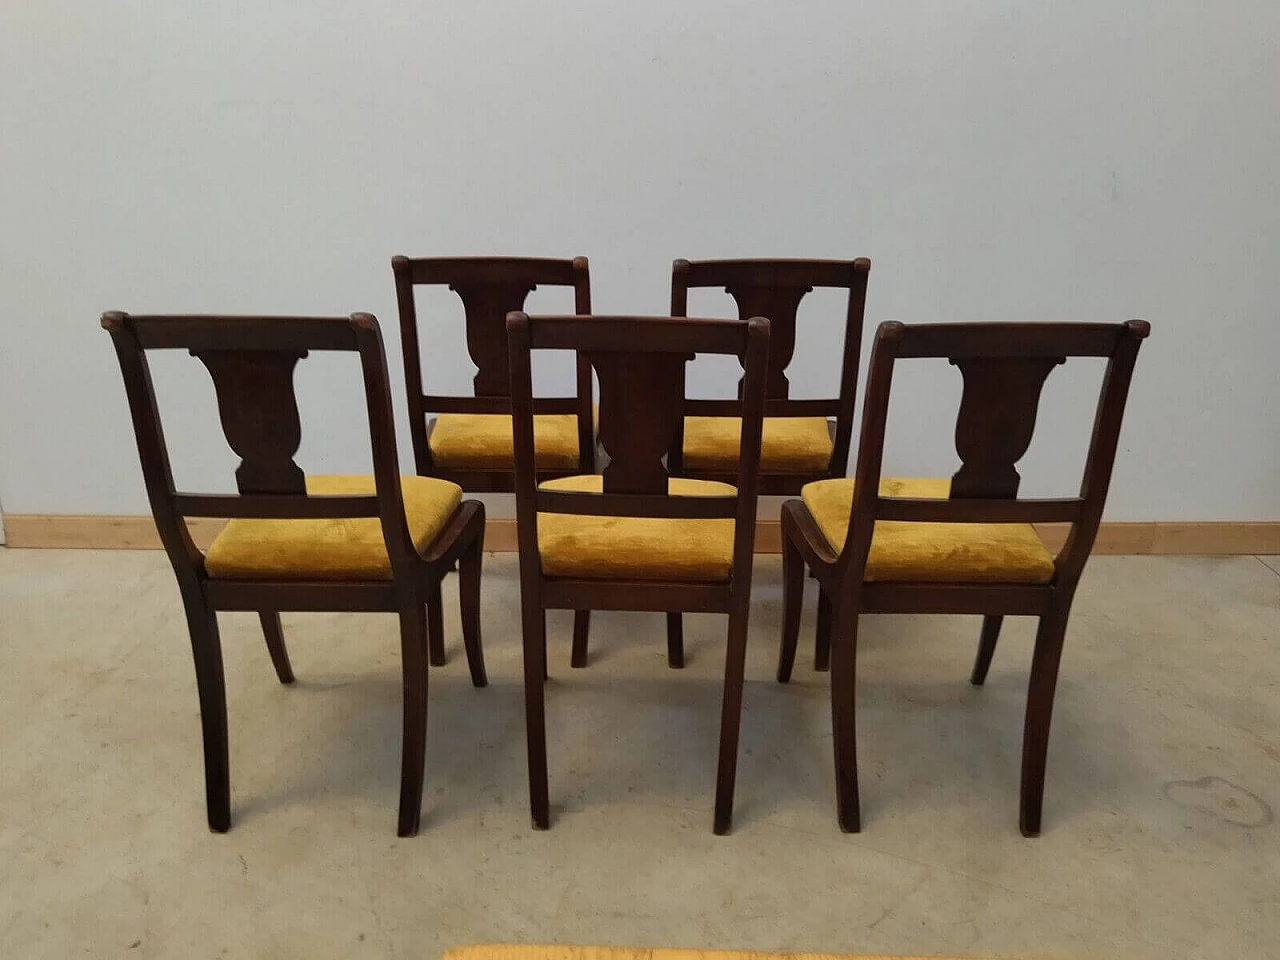 5 Empire-style walnut chairs, early 20th century 11